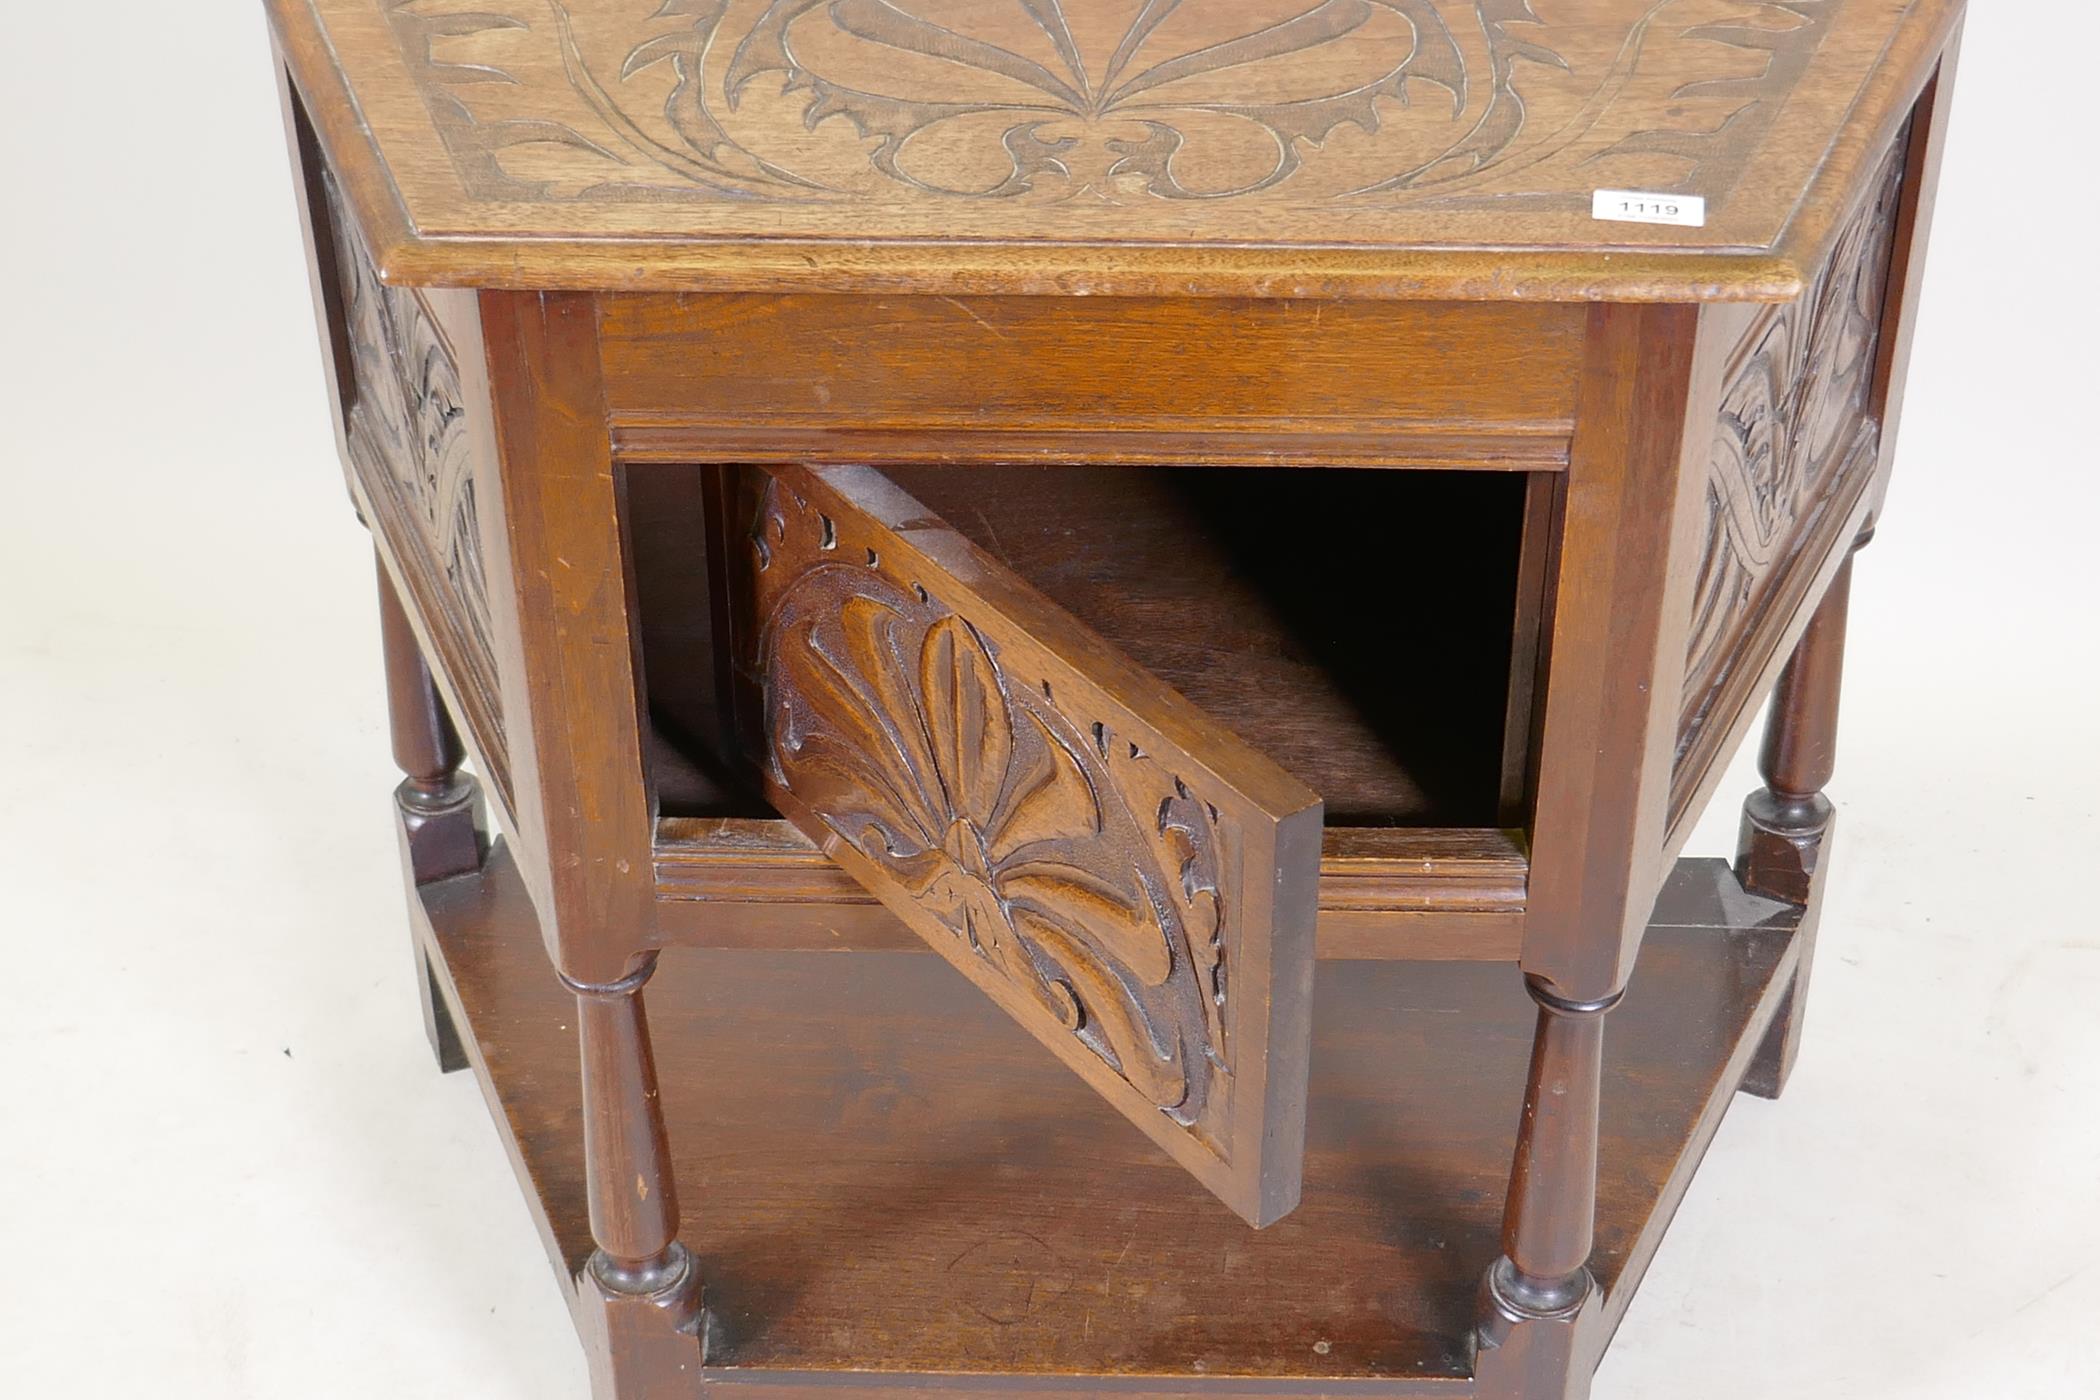 An early C20th walnut credence cabinet with carved panels and turned supports united by an - Image 3 of 3